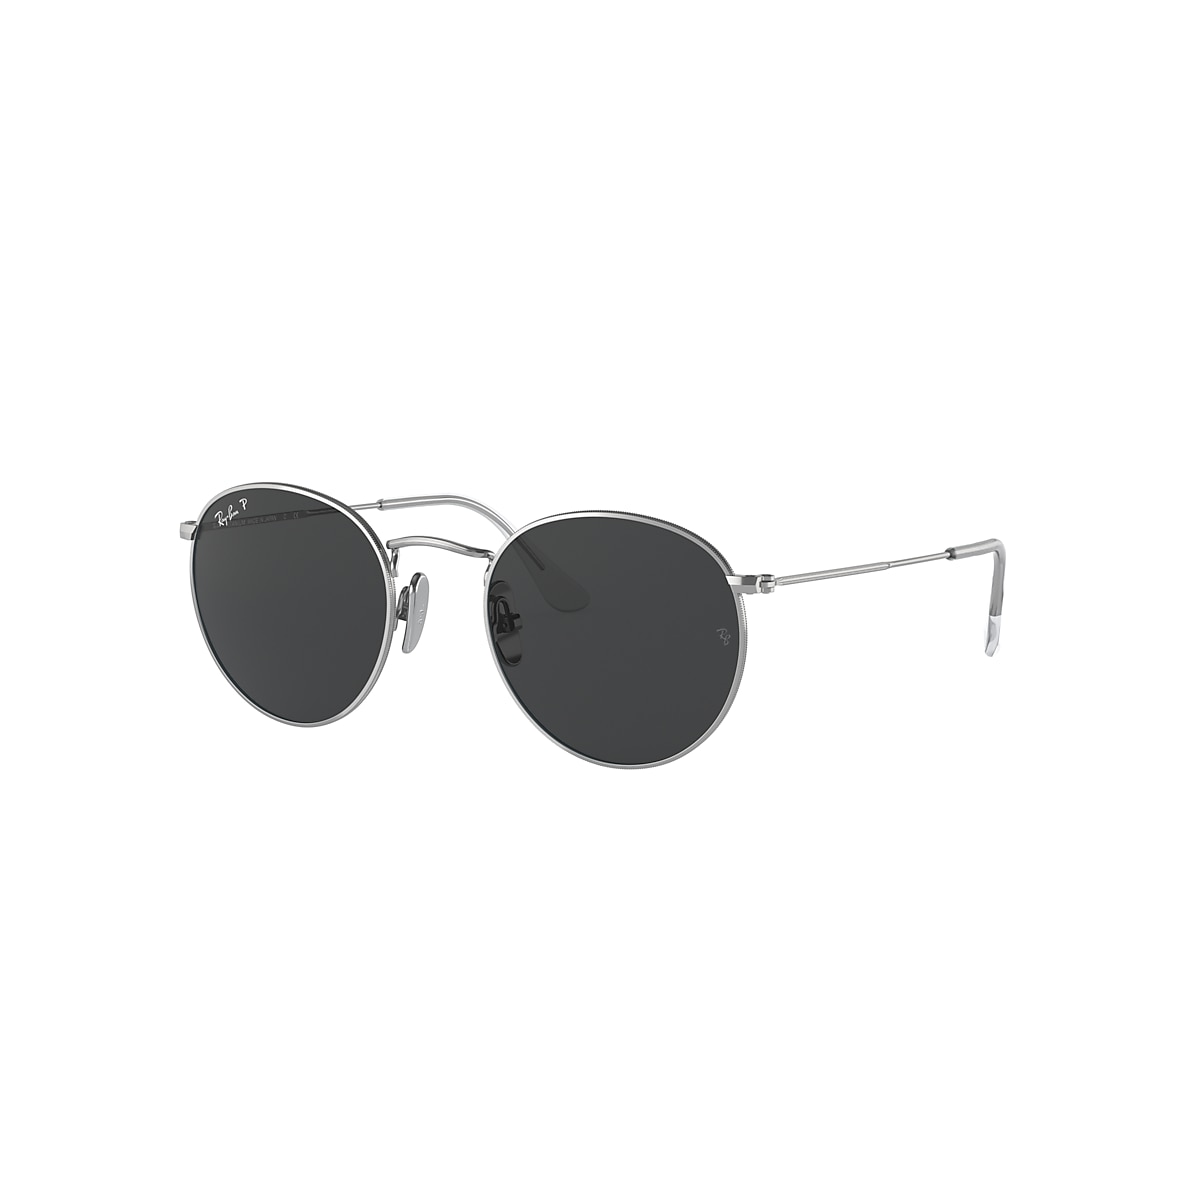 ROUND TITANIUM Sunglasses in Silver and Black - Ray-Ban